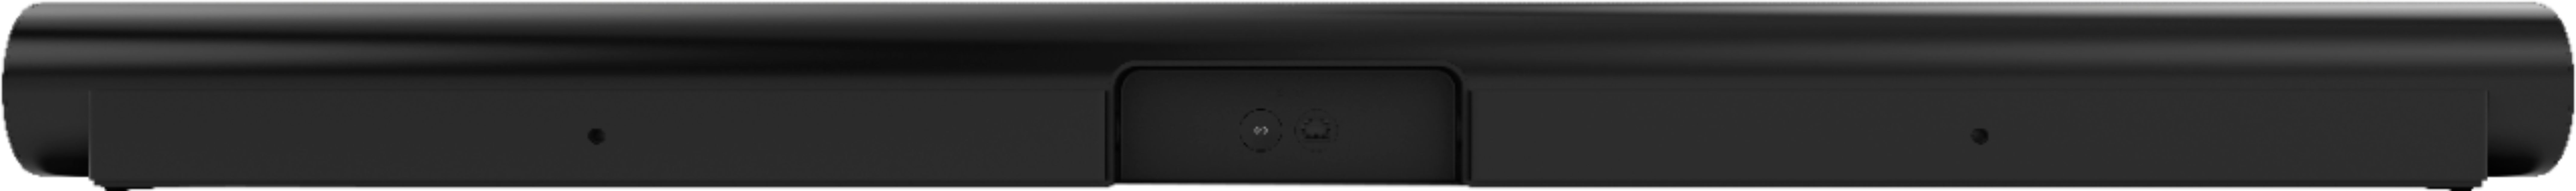 Back View: VIZIO - 5.1-Channel V-Series Soundbar with Wireless Subwoofer and Dolby Audio 5.1/DTS Virtual:X - Black